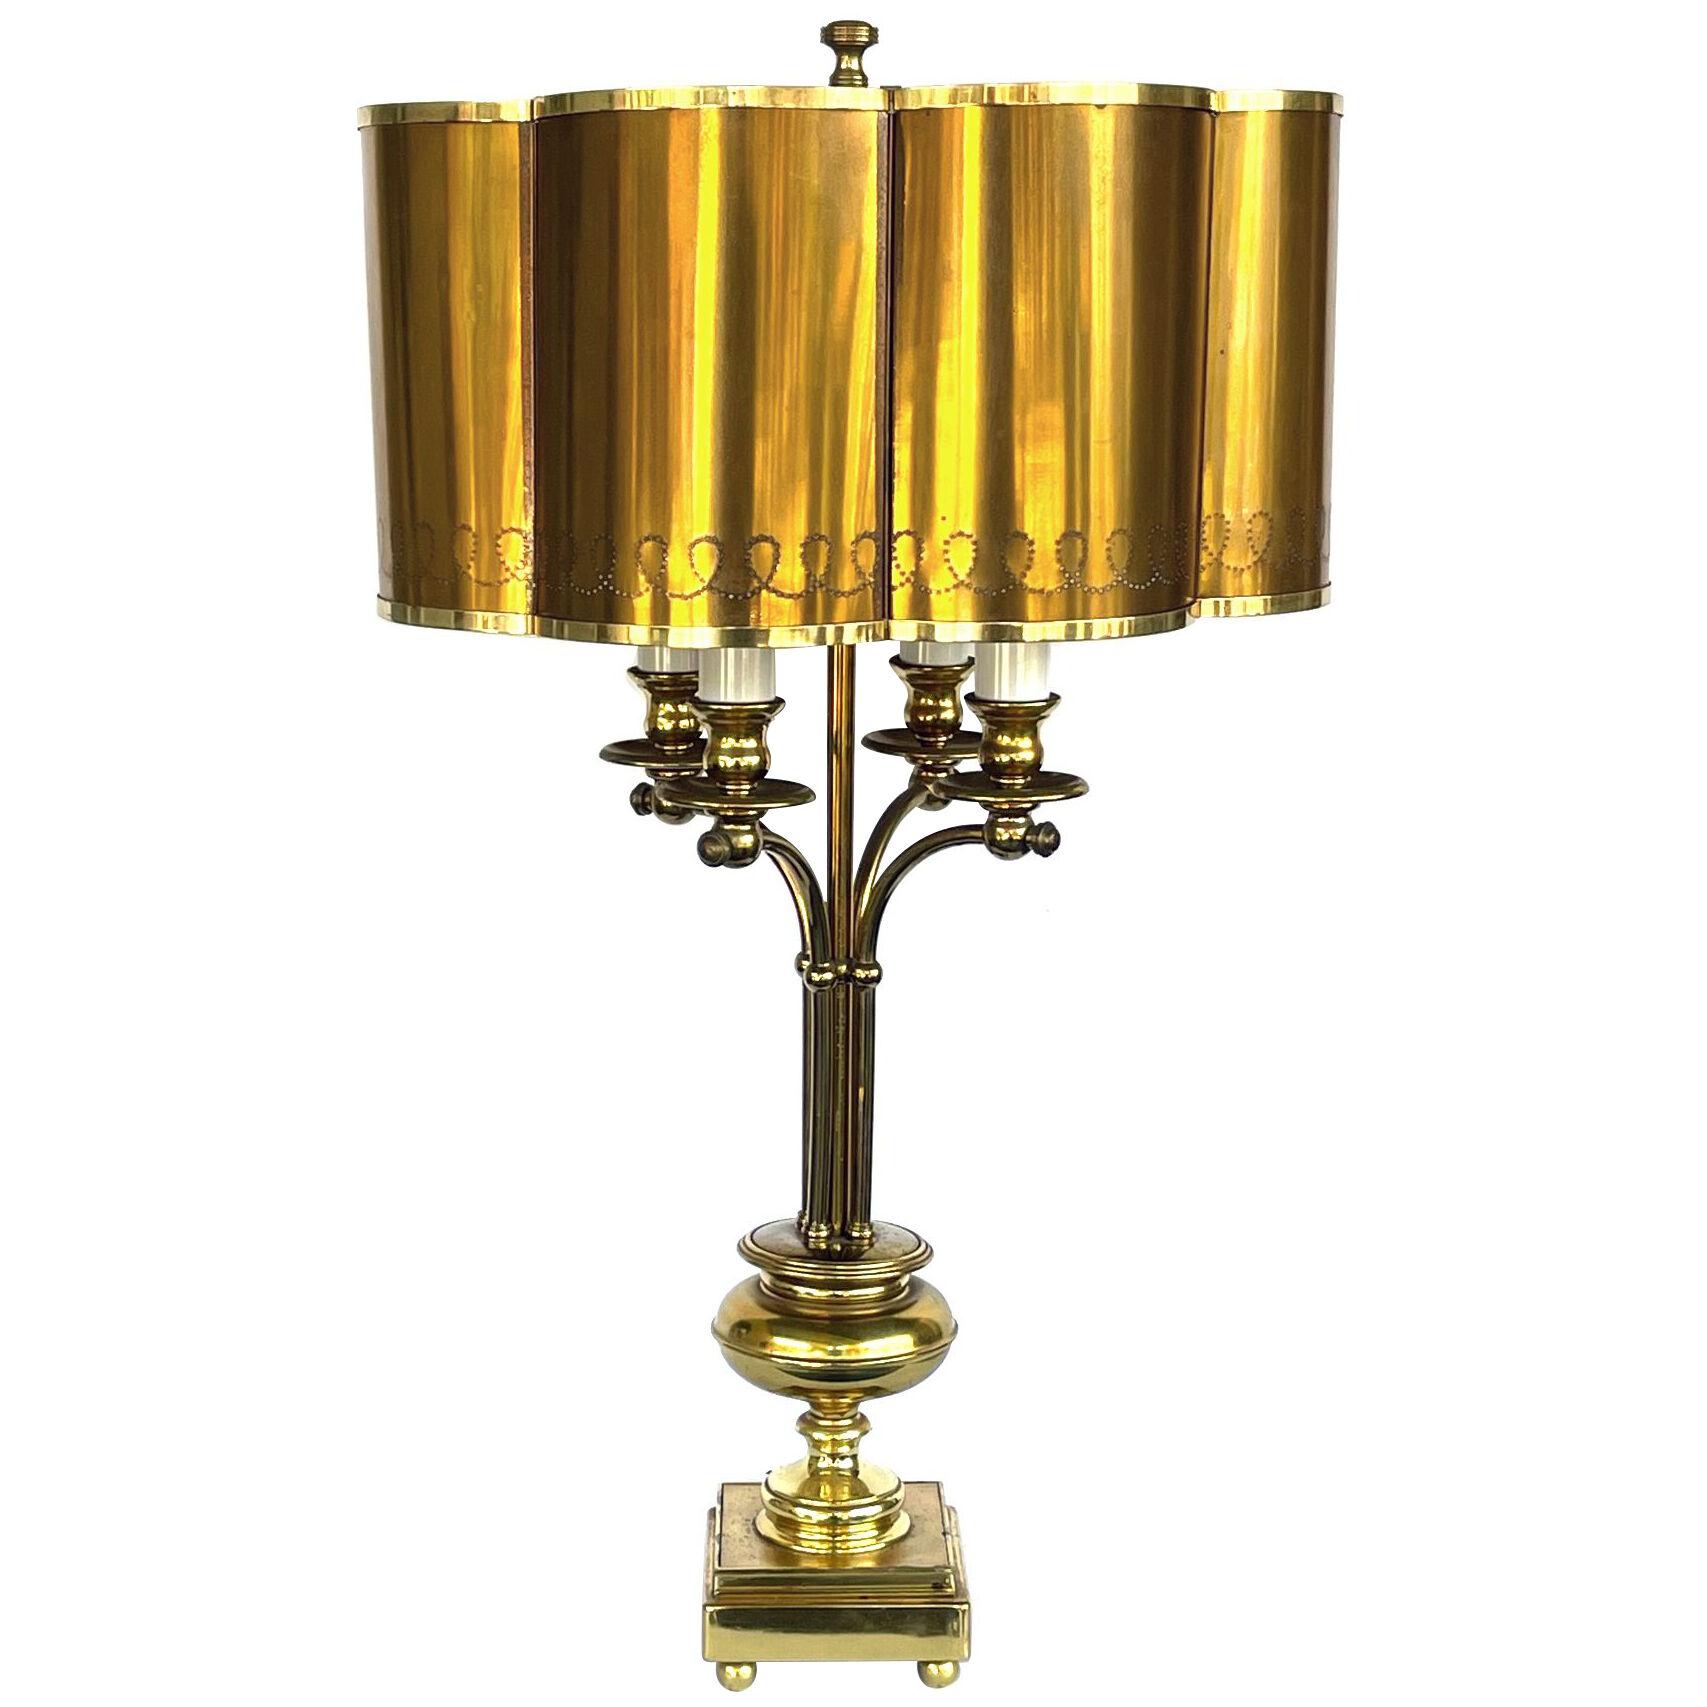 French brass 4-light bouillotte lamp with original scalloped brass shade